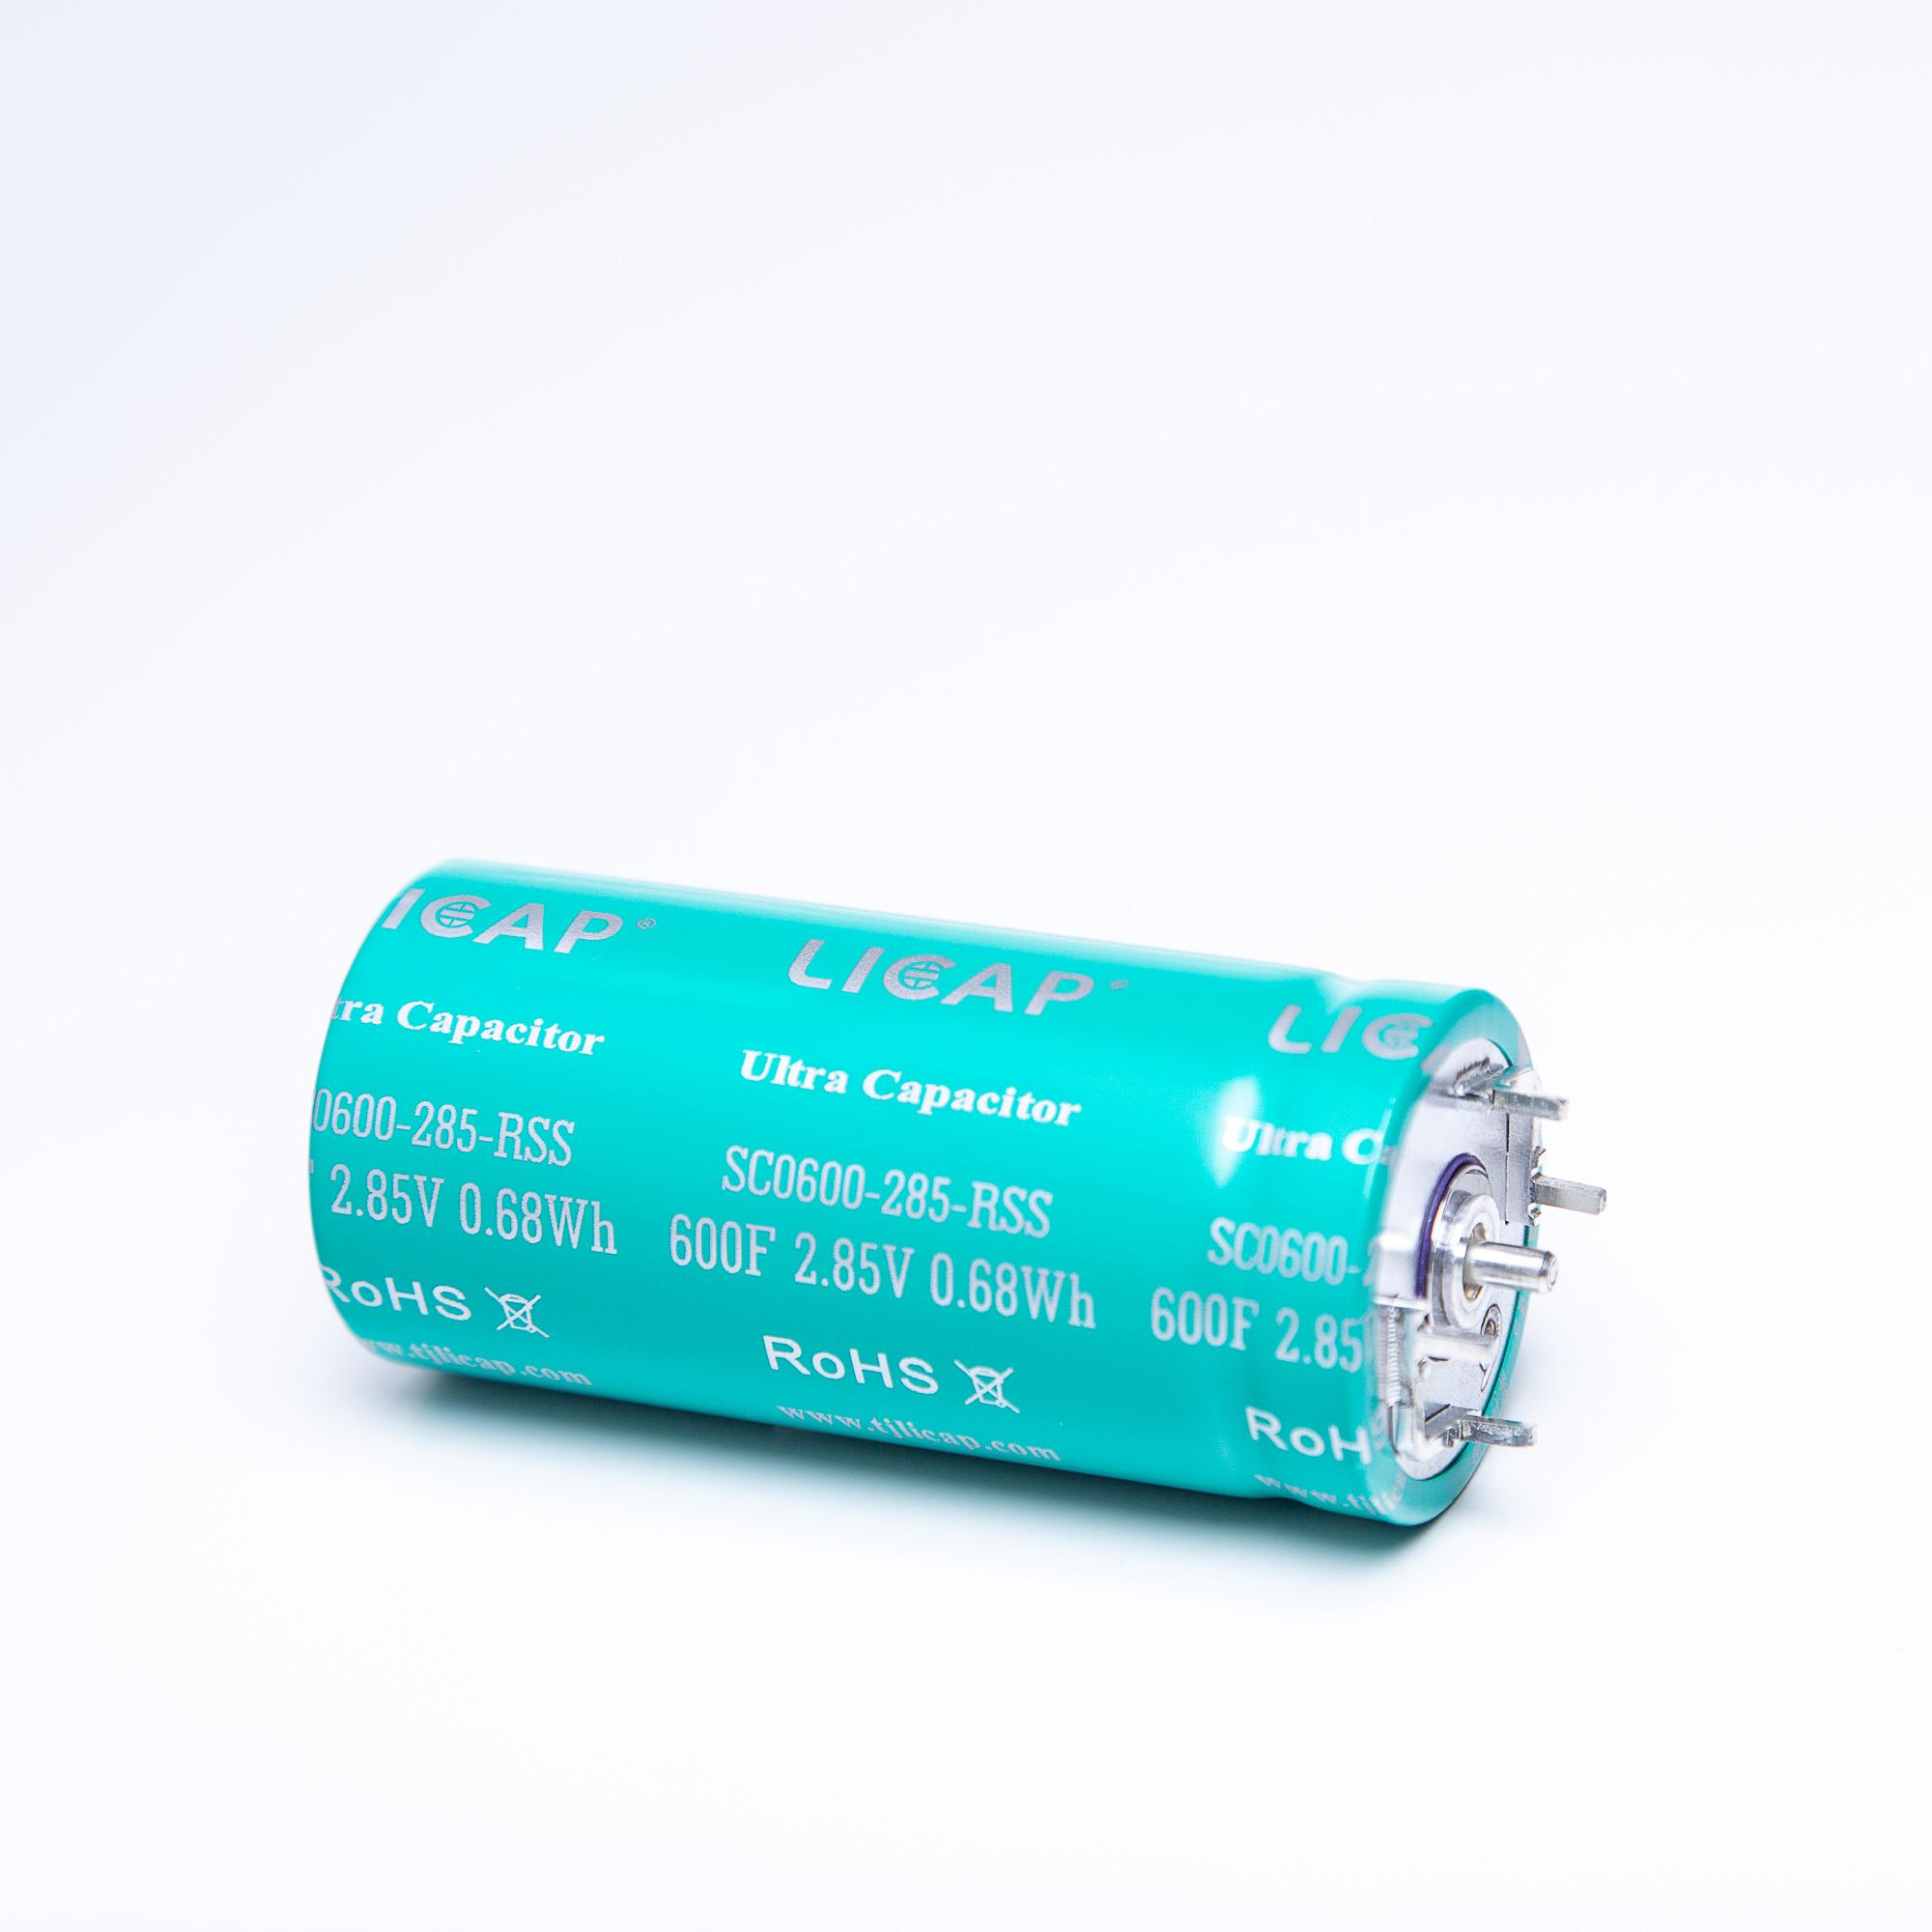 Product 2.85V, 600F Ultracapacitor Cell LICAP Technologies, Inc. - Ultracapacitors, Dry Electrode Technology image